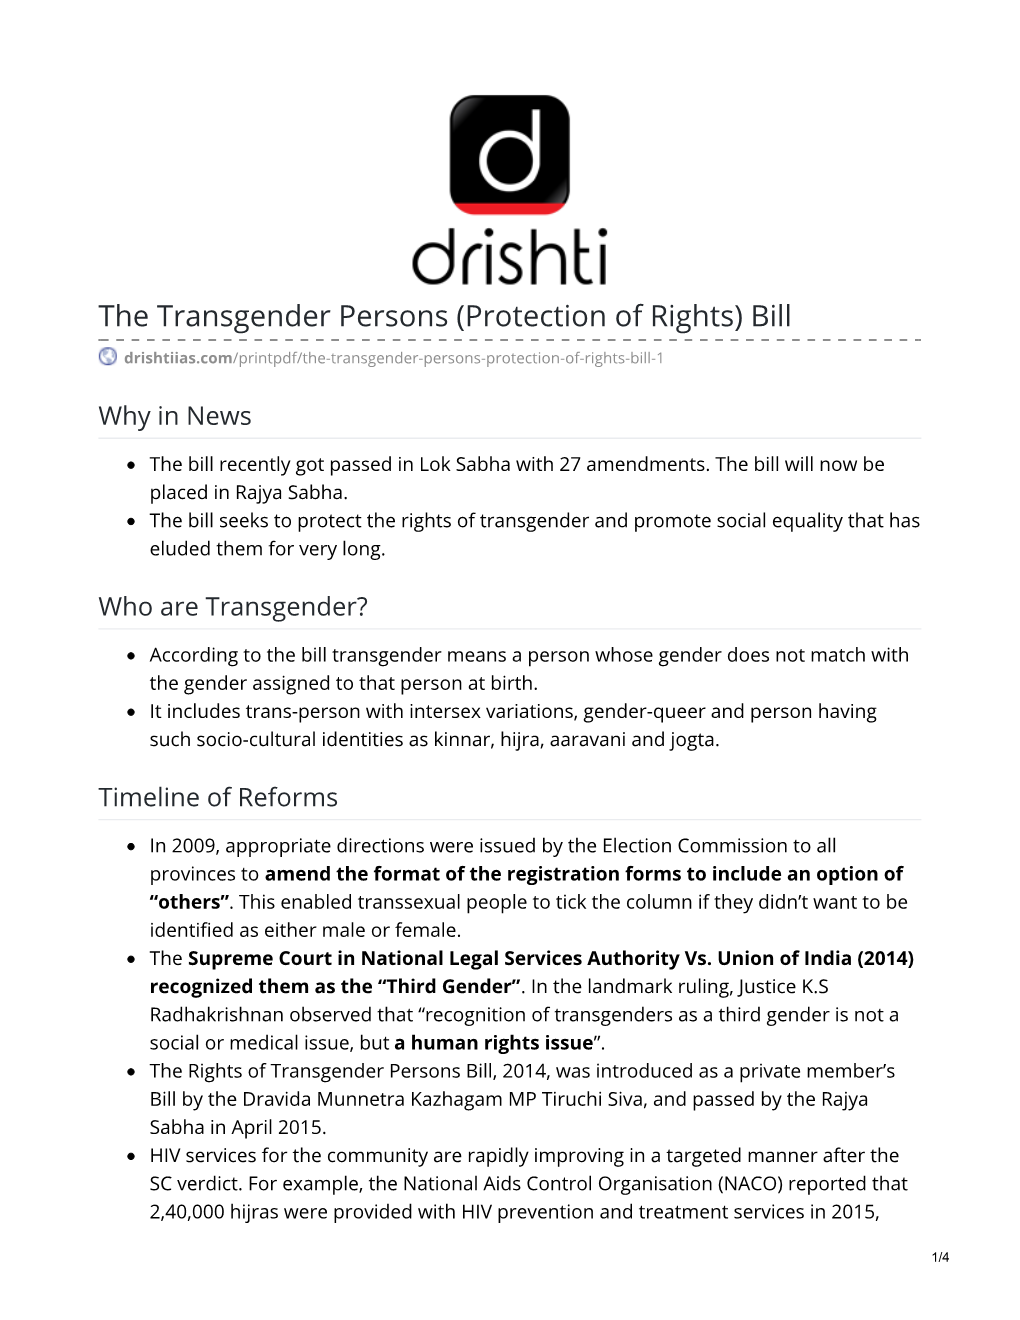 The Transgender Persons (Protection of Rights) Bill